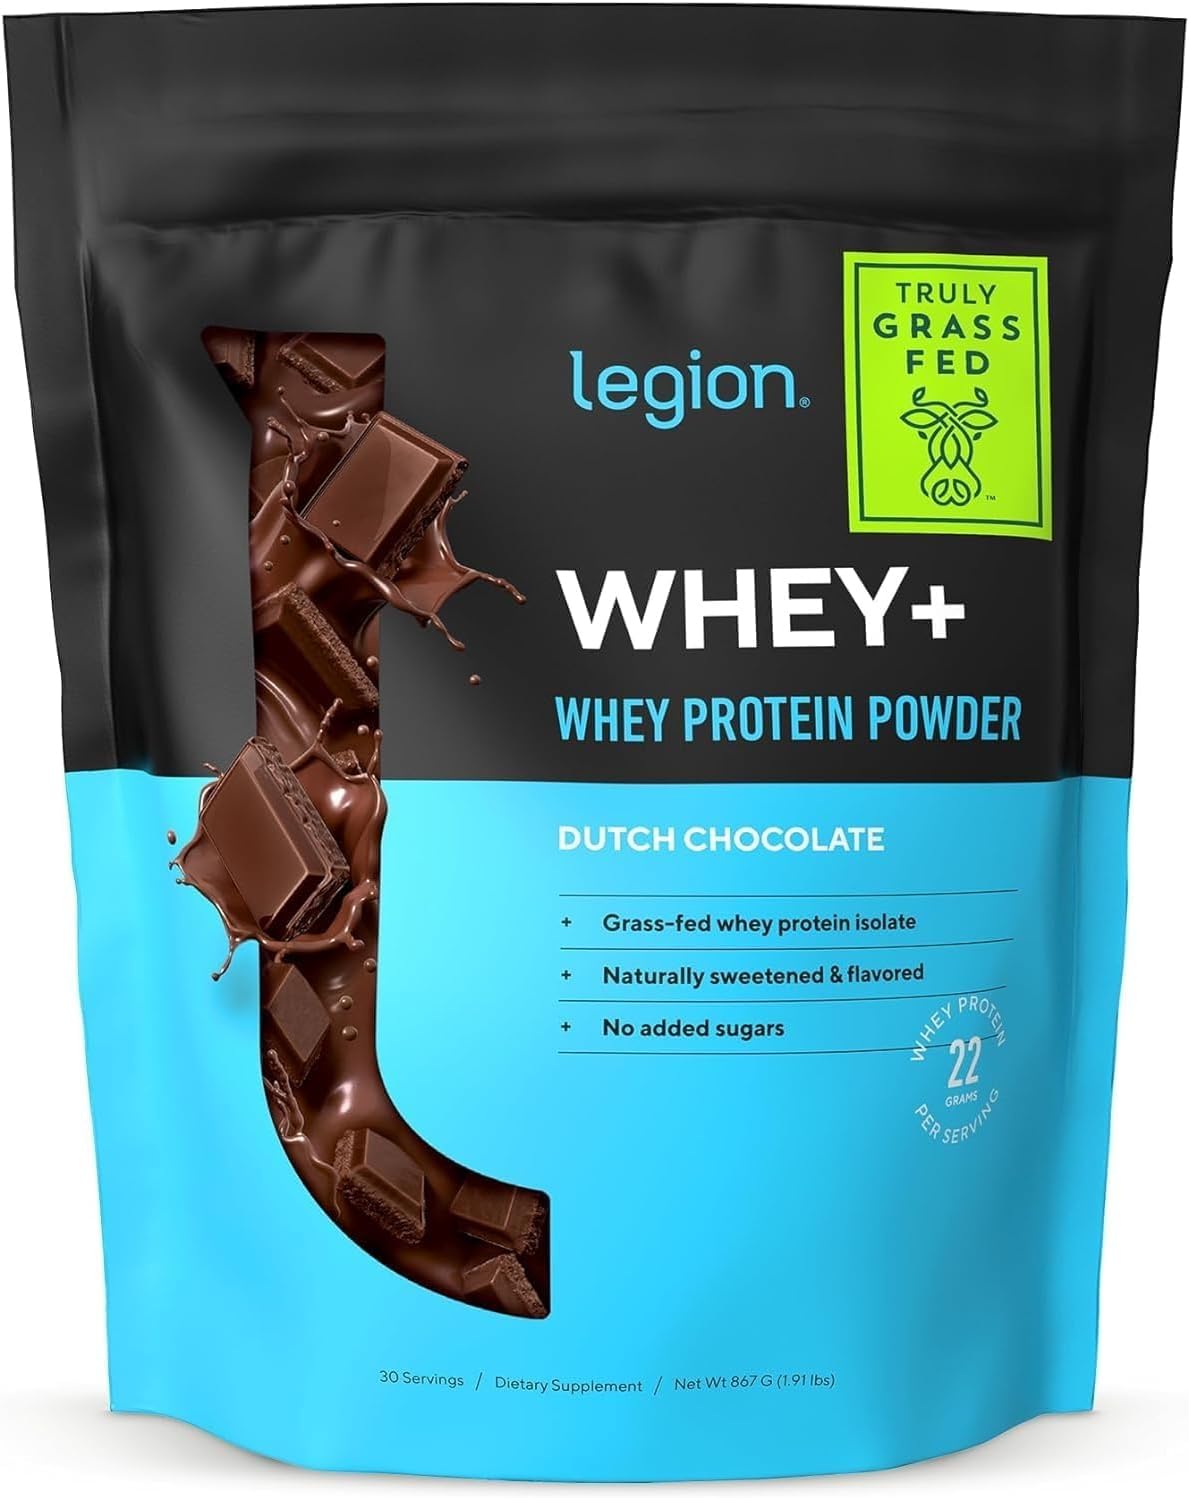 LEGION Whey+ Chocolate Whey Isolate Protein Powder from Grass Fed Cows - Non-GMO, Lactose Free, Sugar Free, Natural Whey Protein Isolate 30 Servings